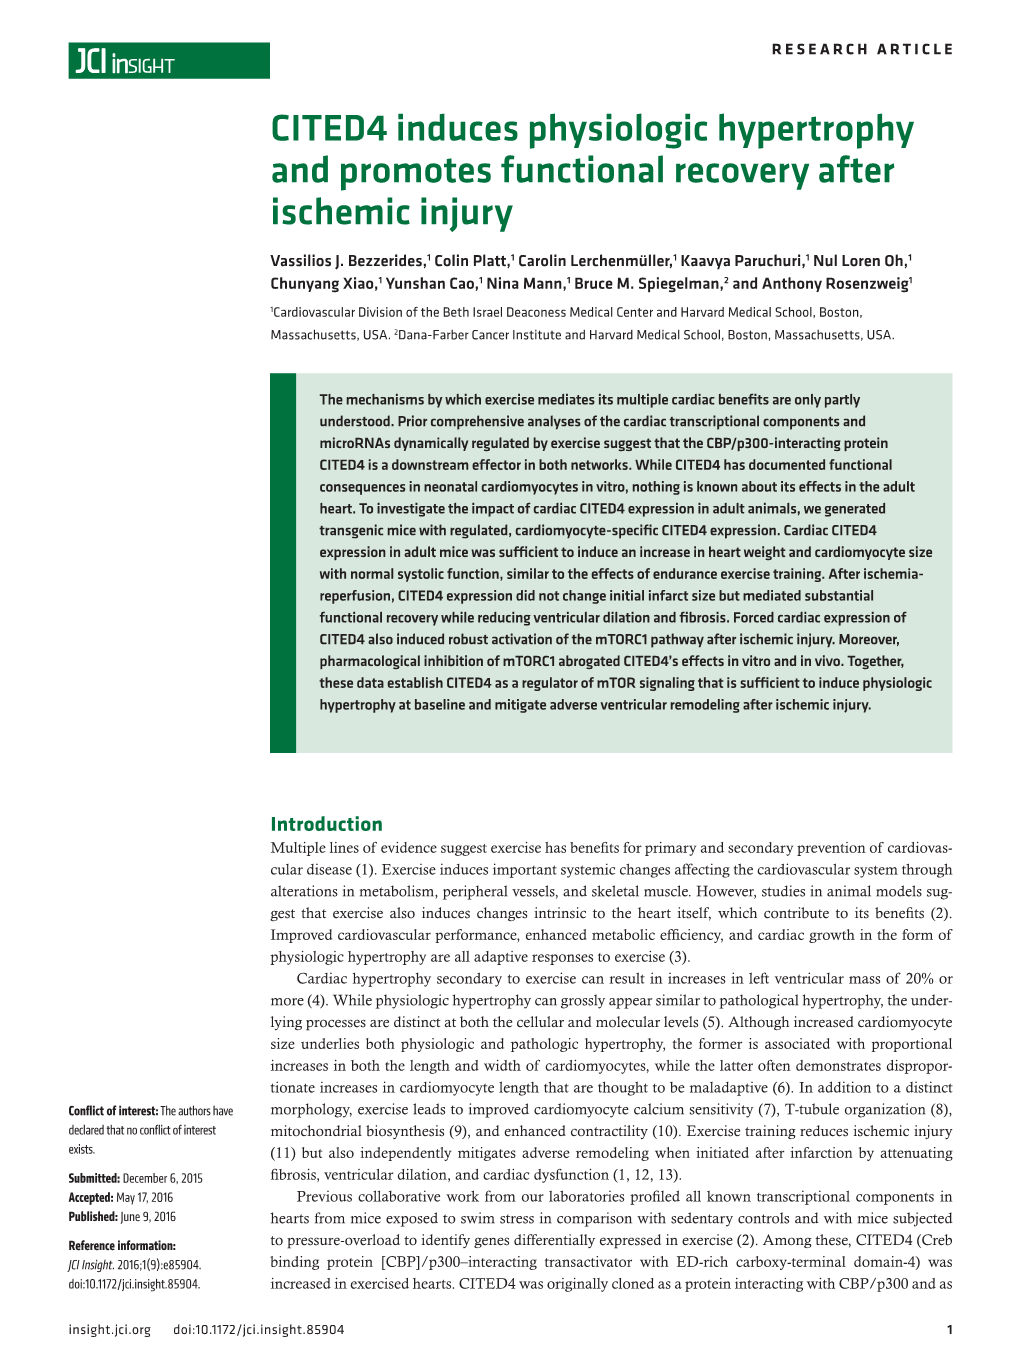 CITED4 Induces Physiologic Hypertrophy and Promotes Functional Recovery After Ischemic Injury